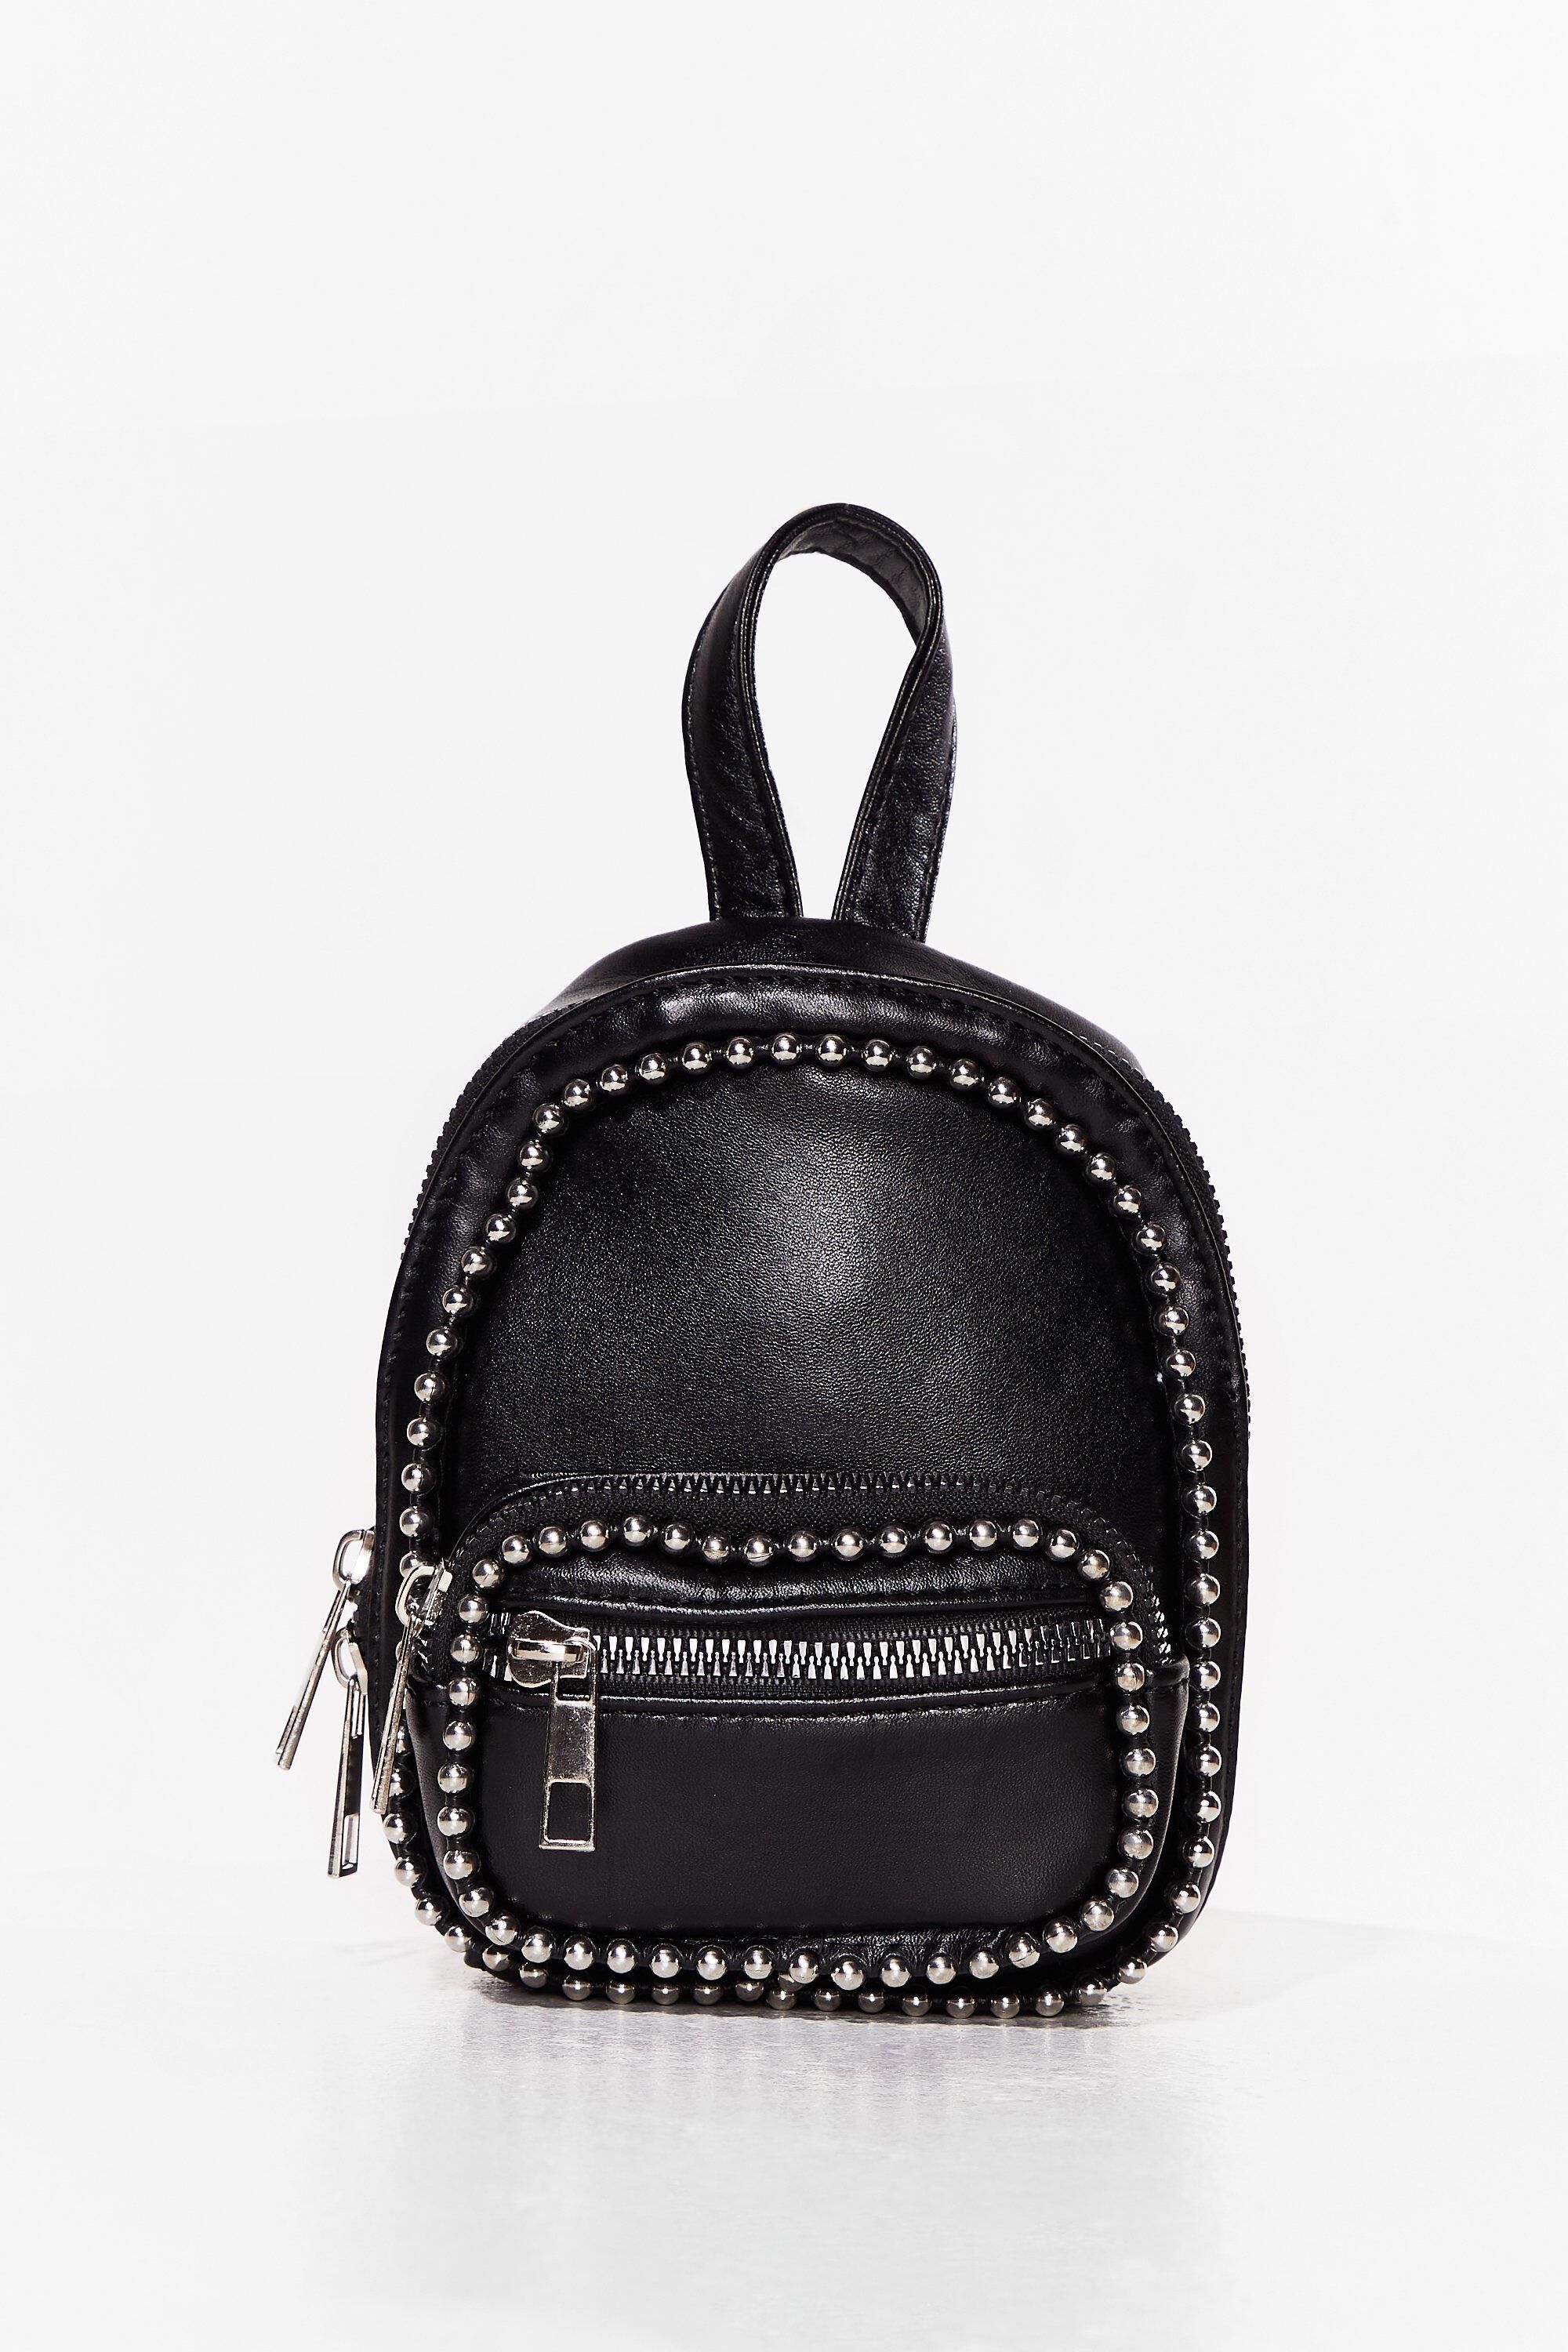 Nasty Gal Womens Studded Faux Leather Mini Backpack - Black - ONE SIZE, Black